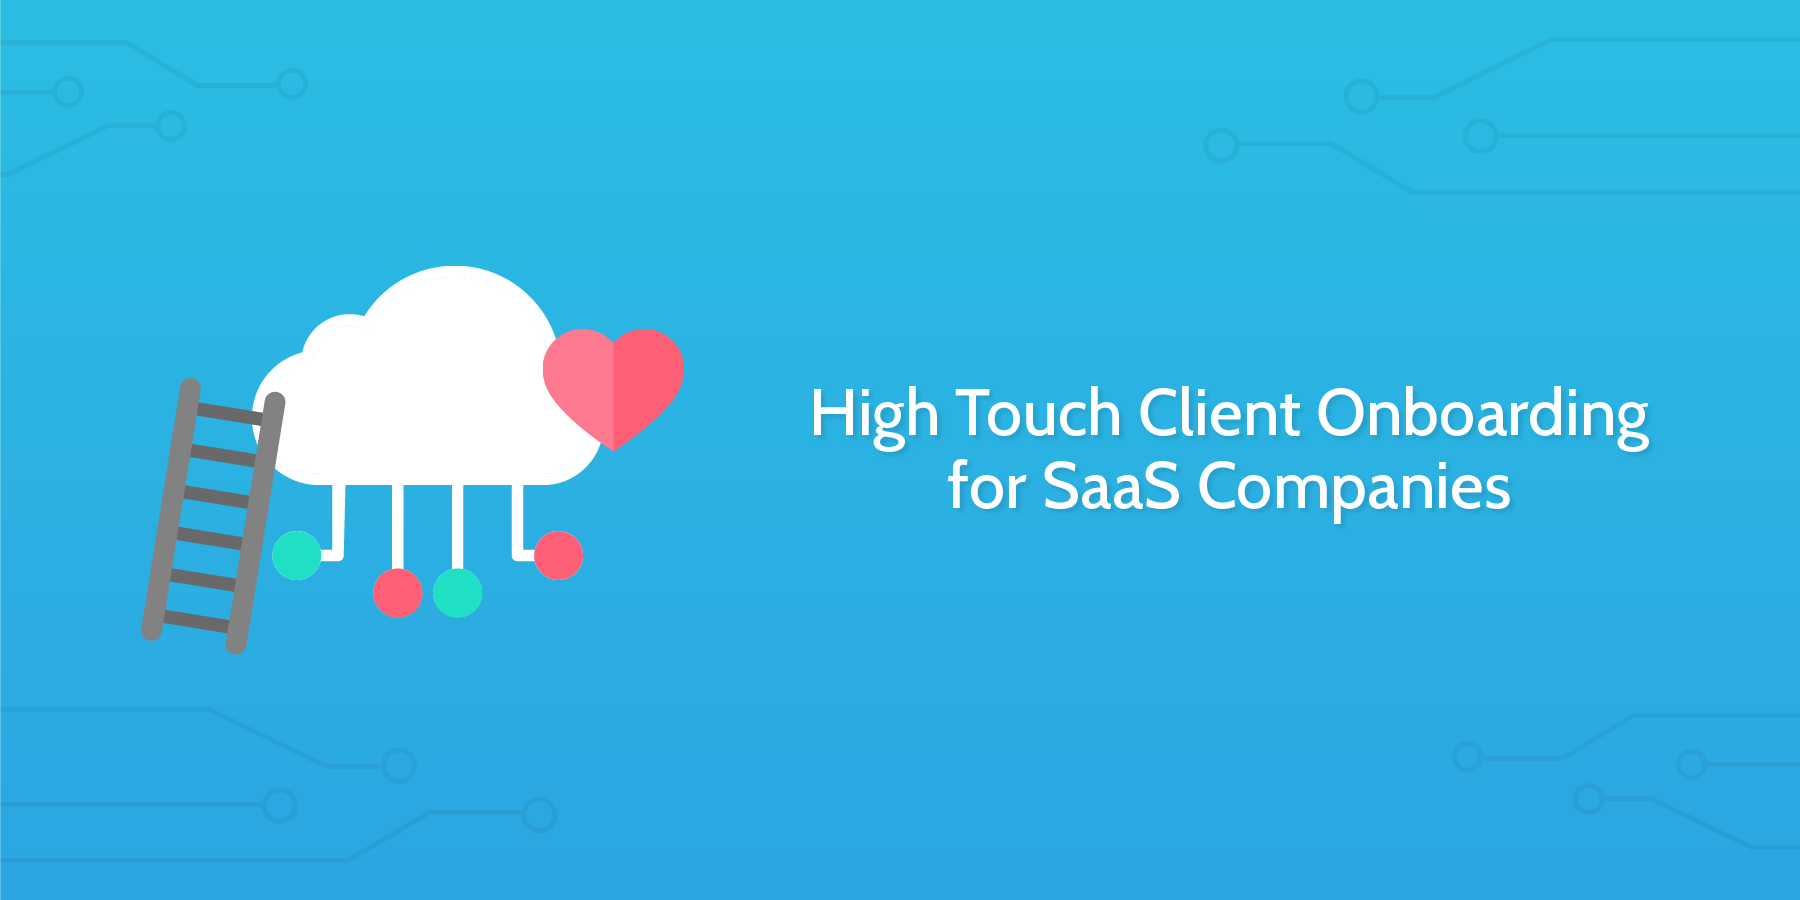 High-Touch Onboarding for SaaS